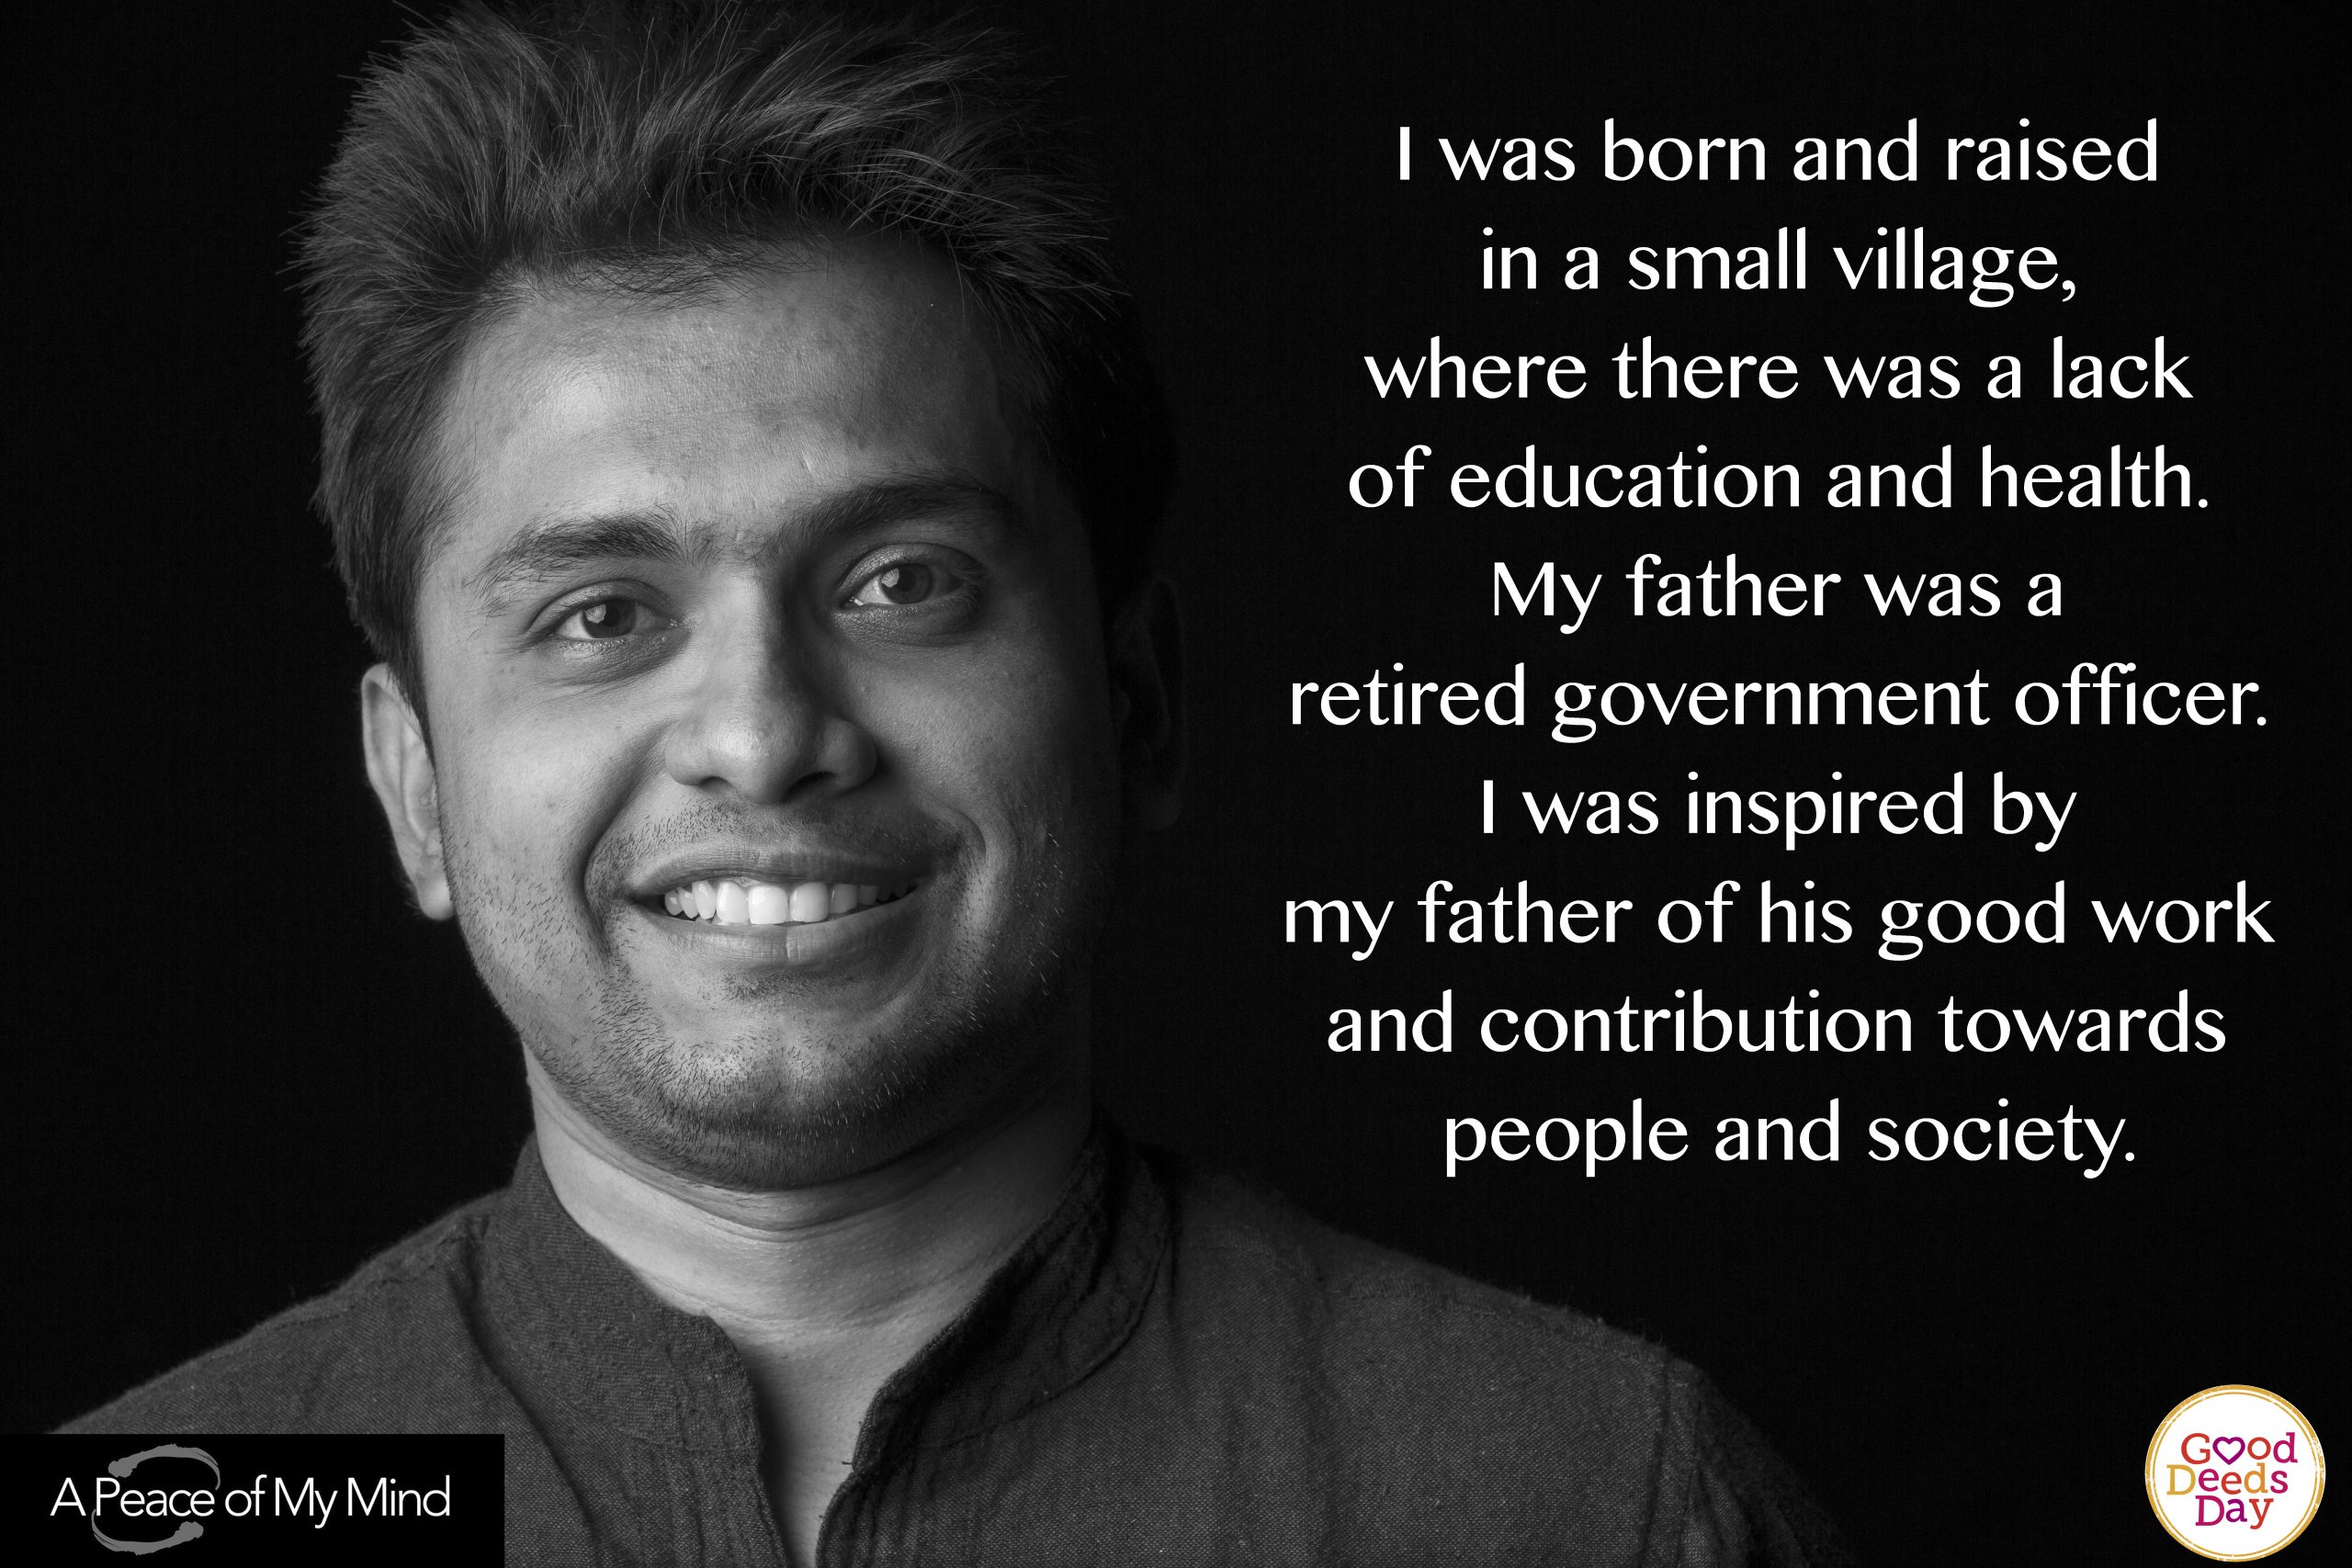 I was born and raised n a small village, where there was a lack of education and health. My father was a retired government officer. I was inspired by my father of his good work and contribution toward people and society.